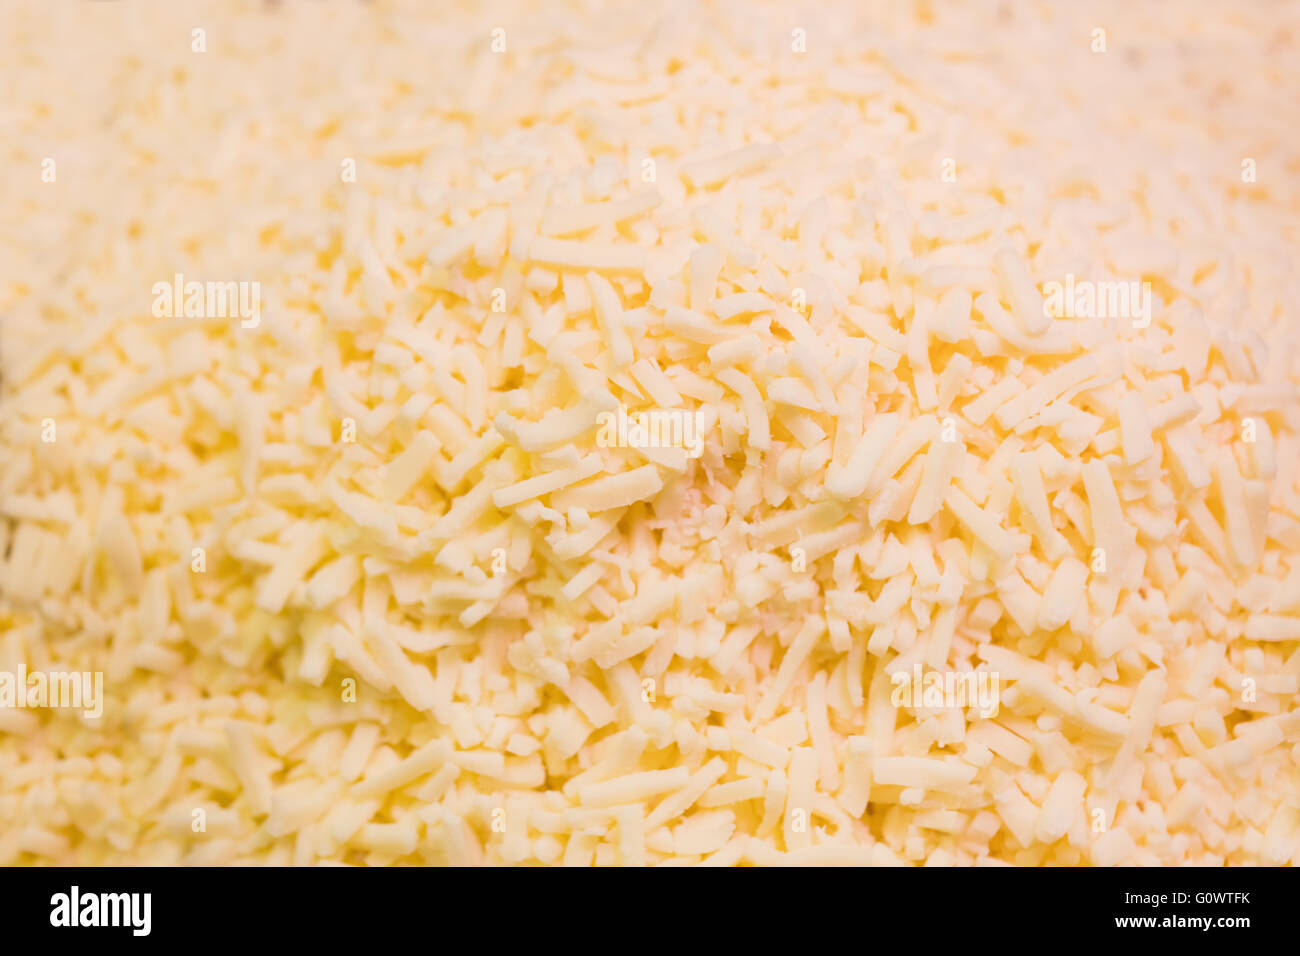 View of  grated cheese Stock Photo